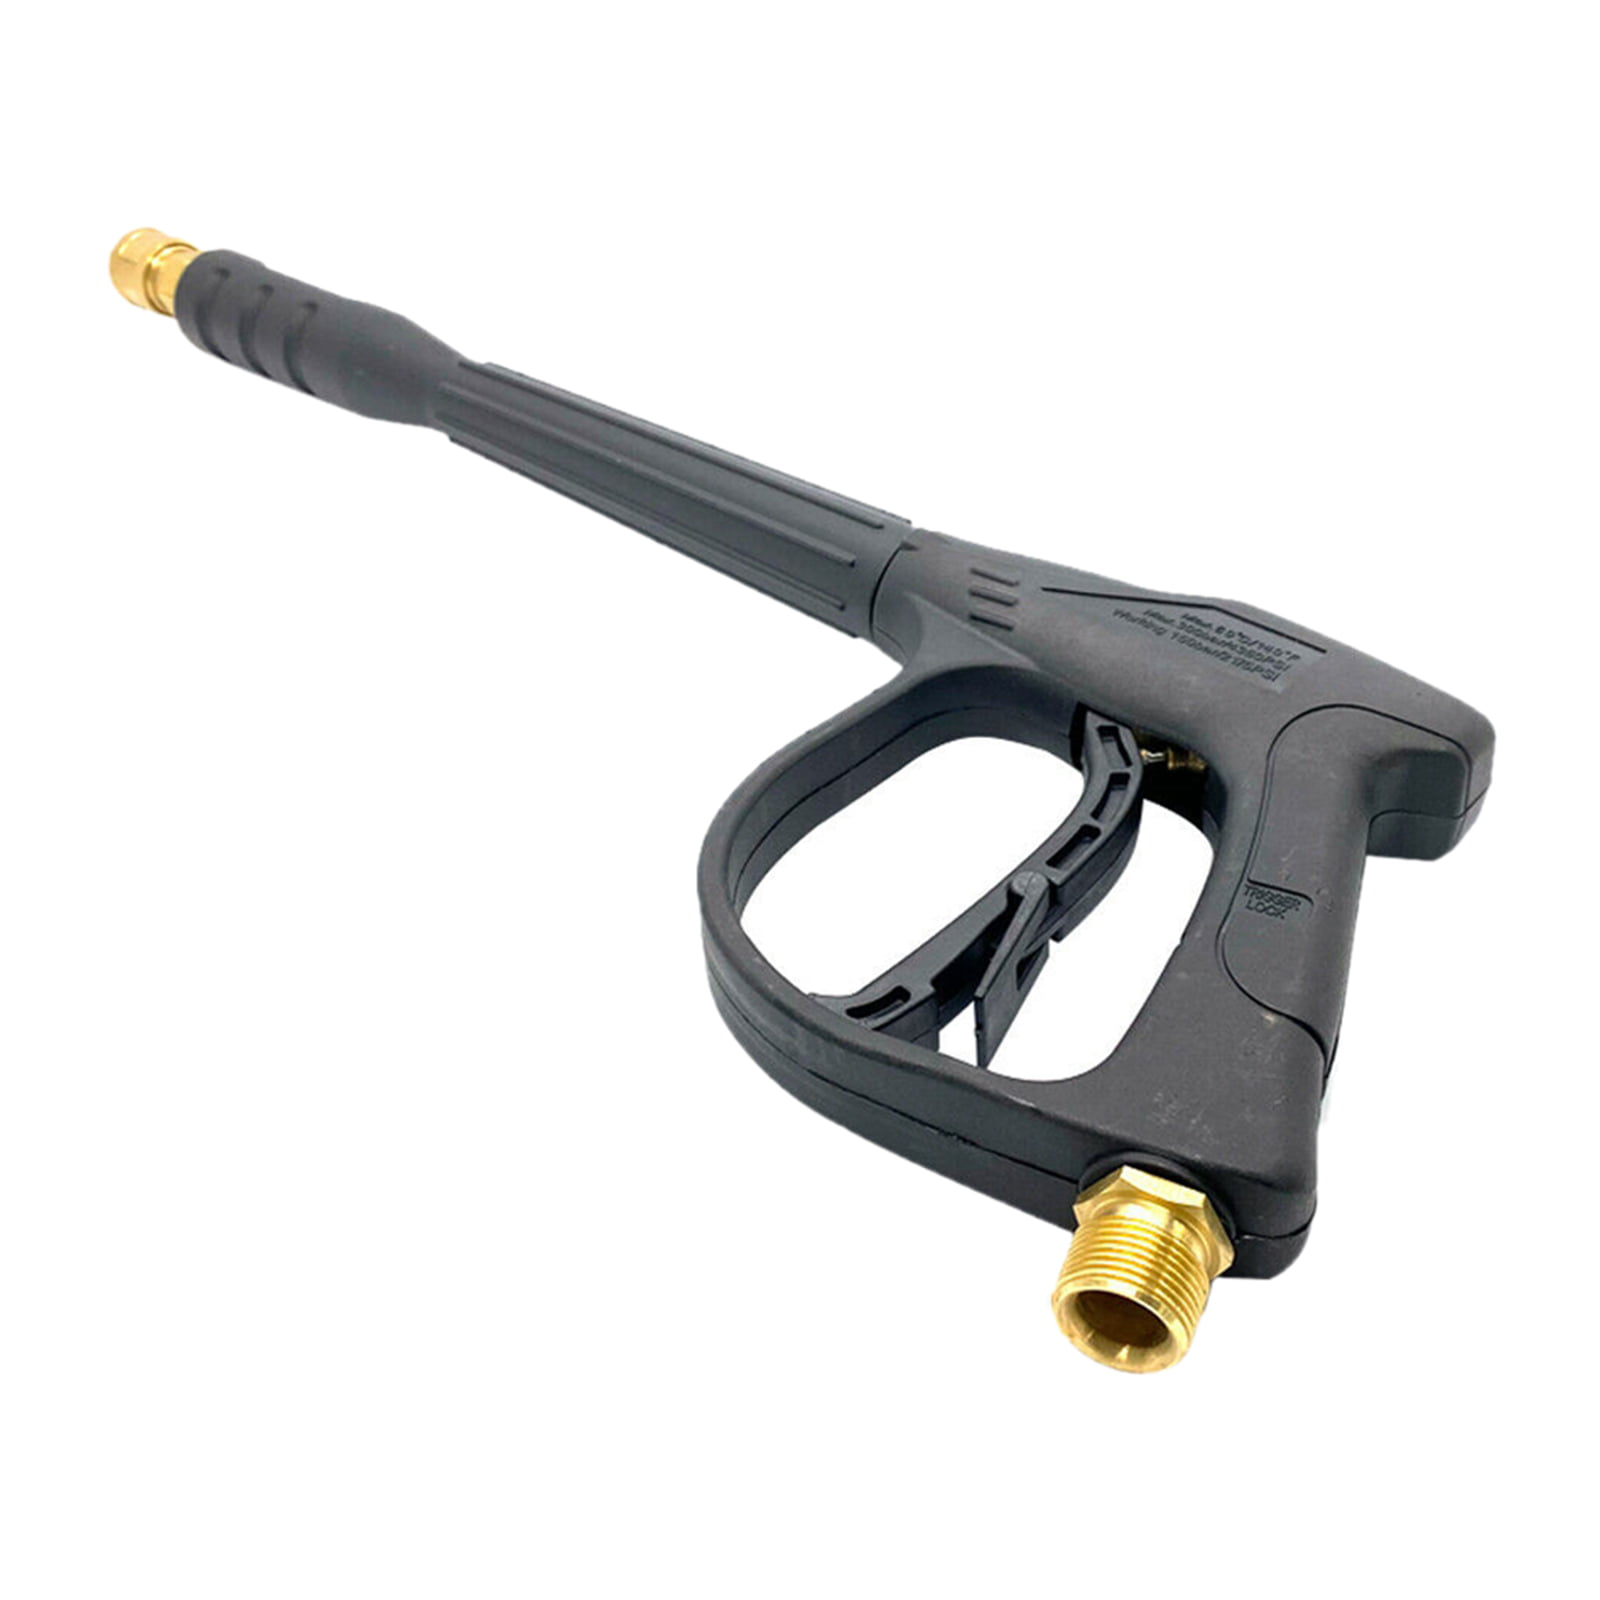 Yard Force Universal-Fit Trigger Handle and Wand with Adjustable Tip 1600 PSI